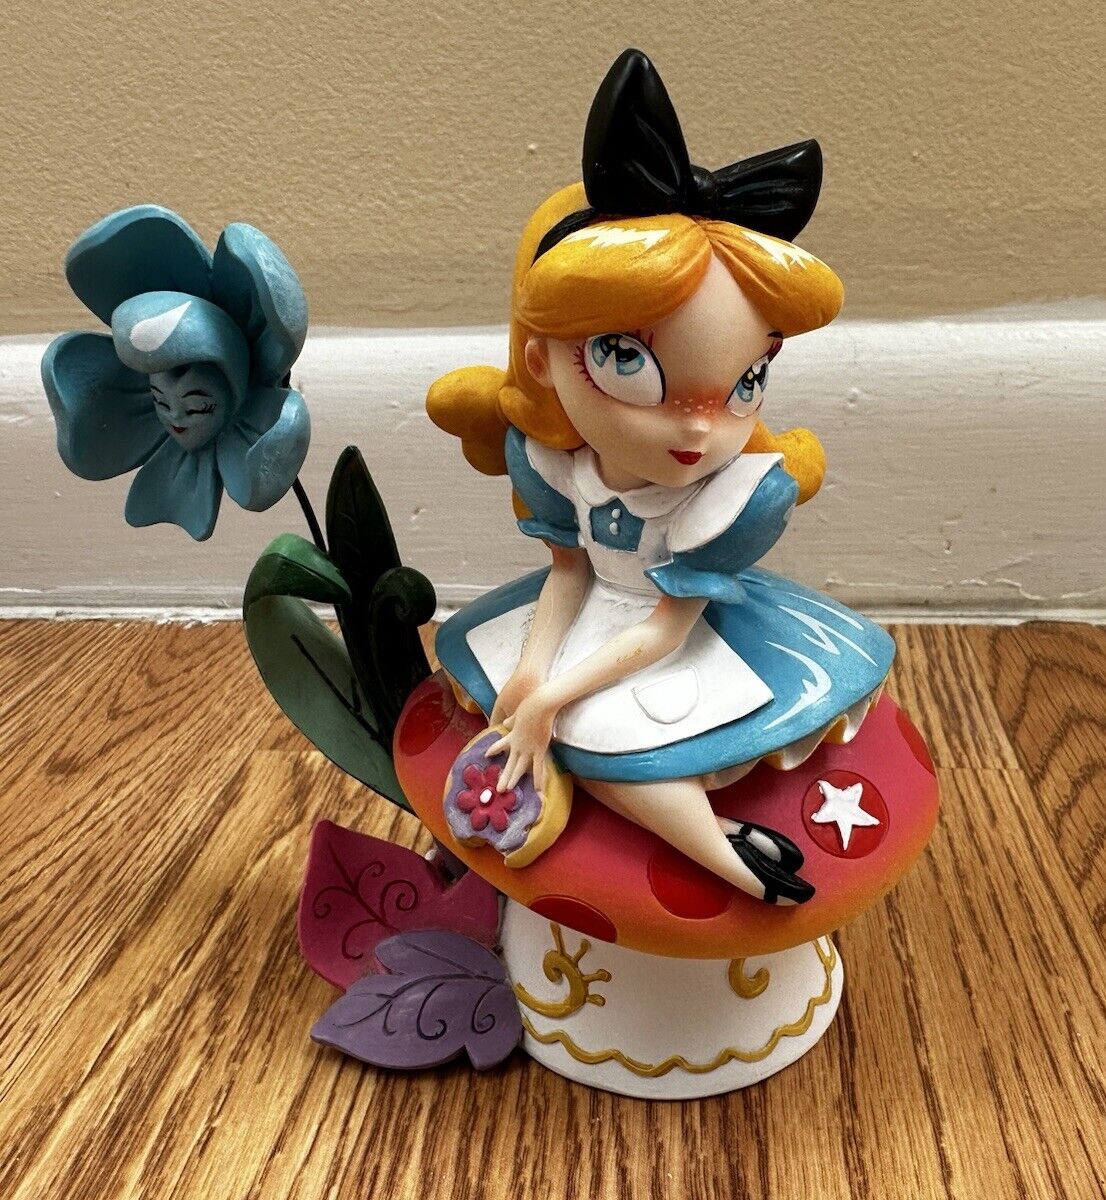 The World of Miss Mindy Disney Showcase Collection Alice in Wonderland 6001035